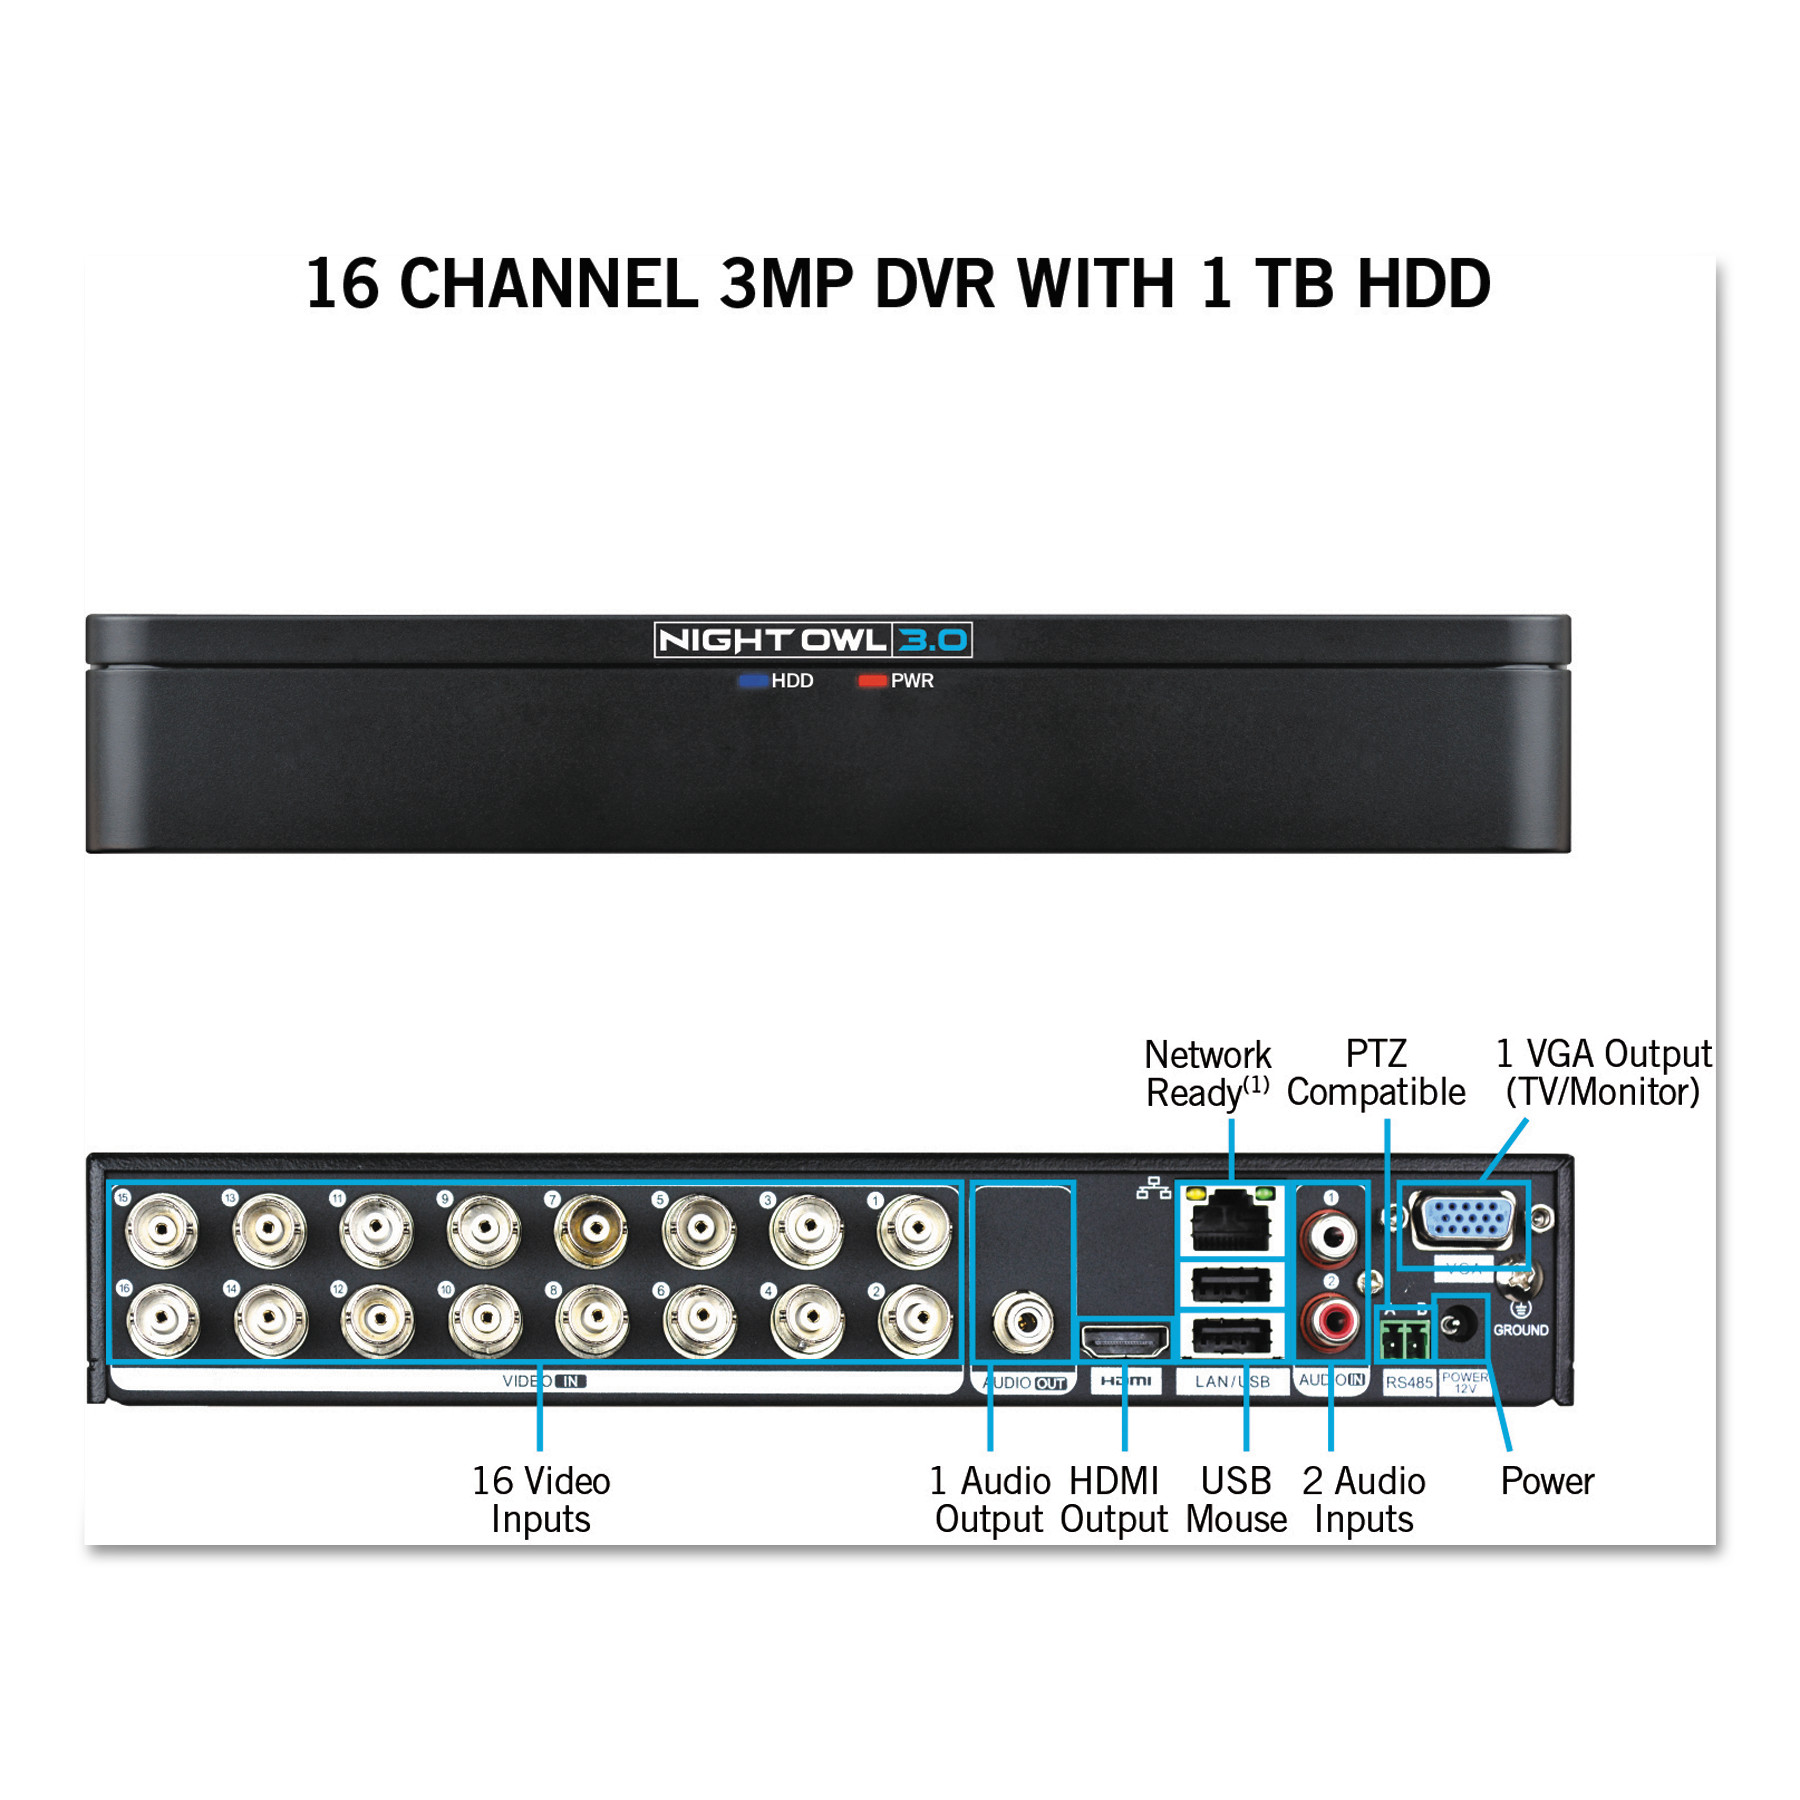 16 Channel Extreme HD 3MP DVR with 1 TB Hard Drive, 1080p Resolution